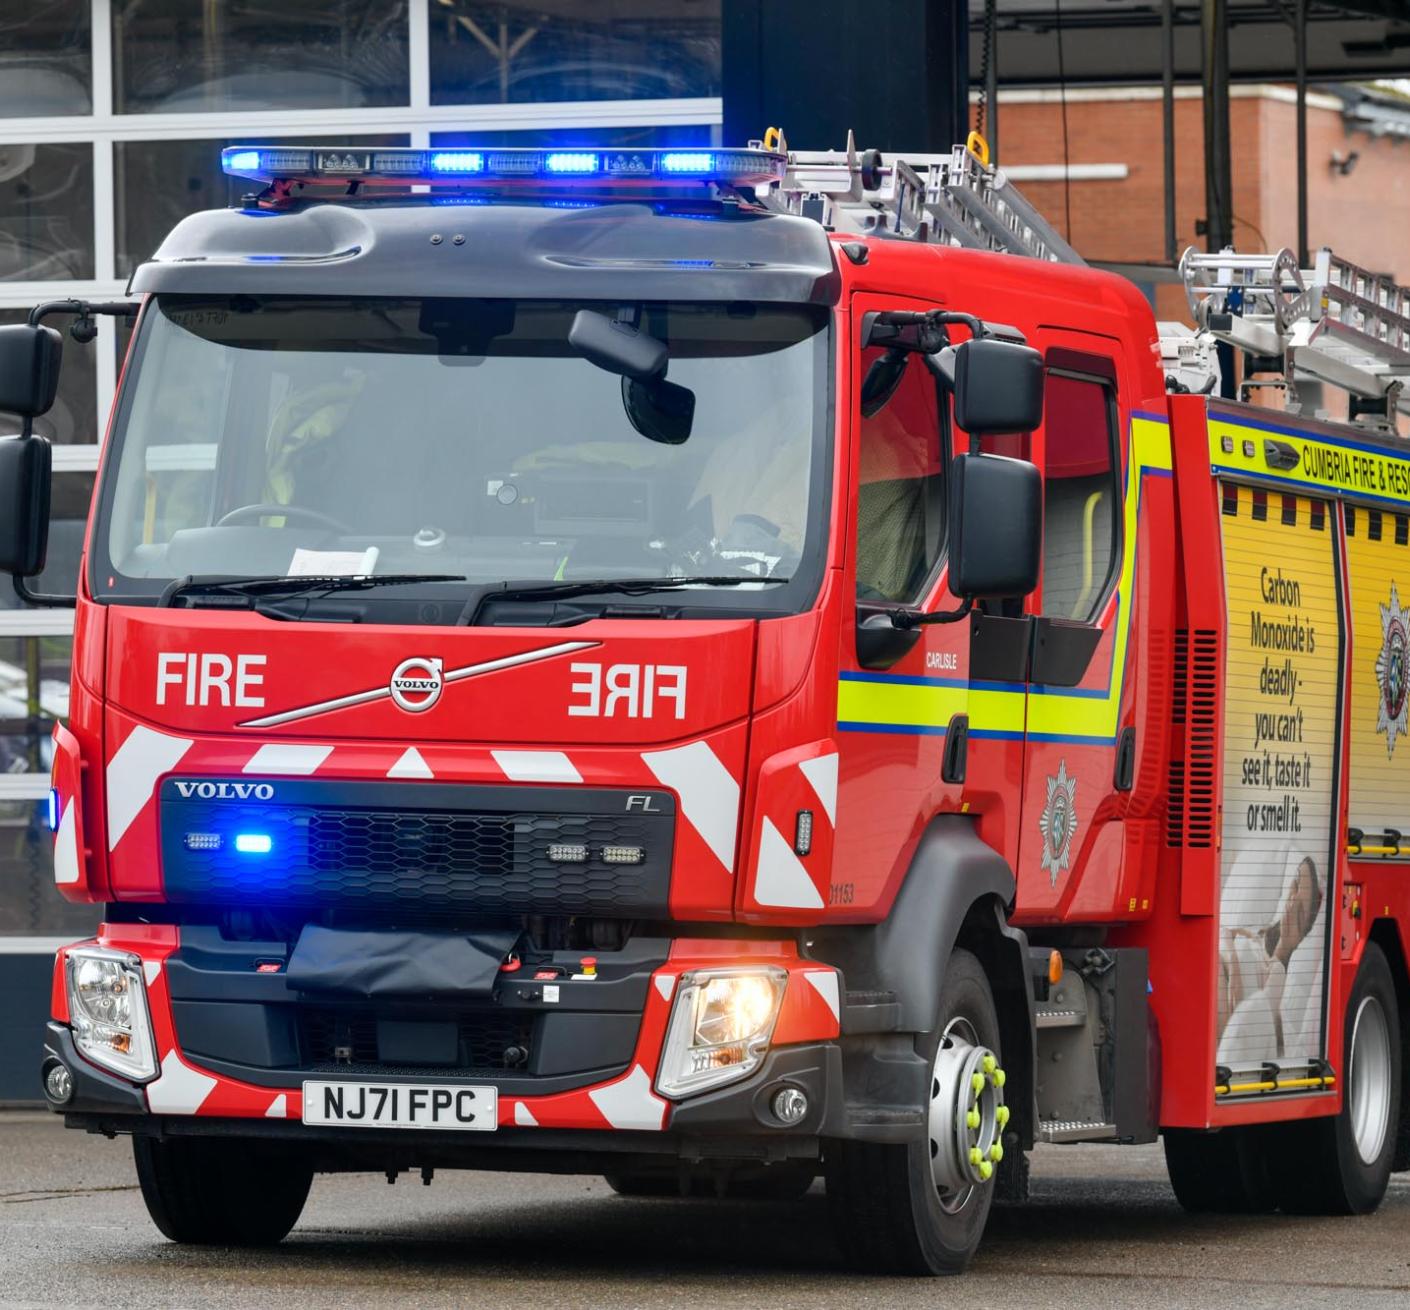 Fire engine with blue lights on